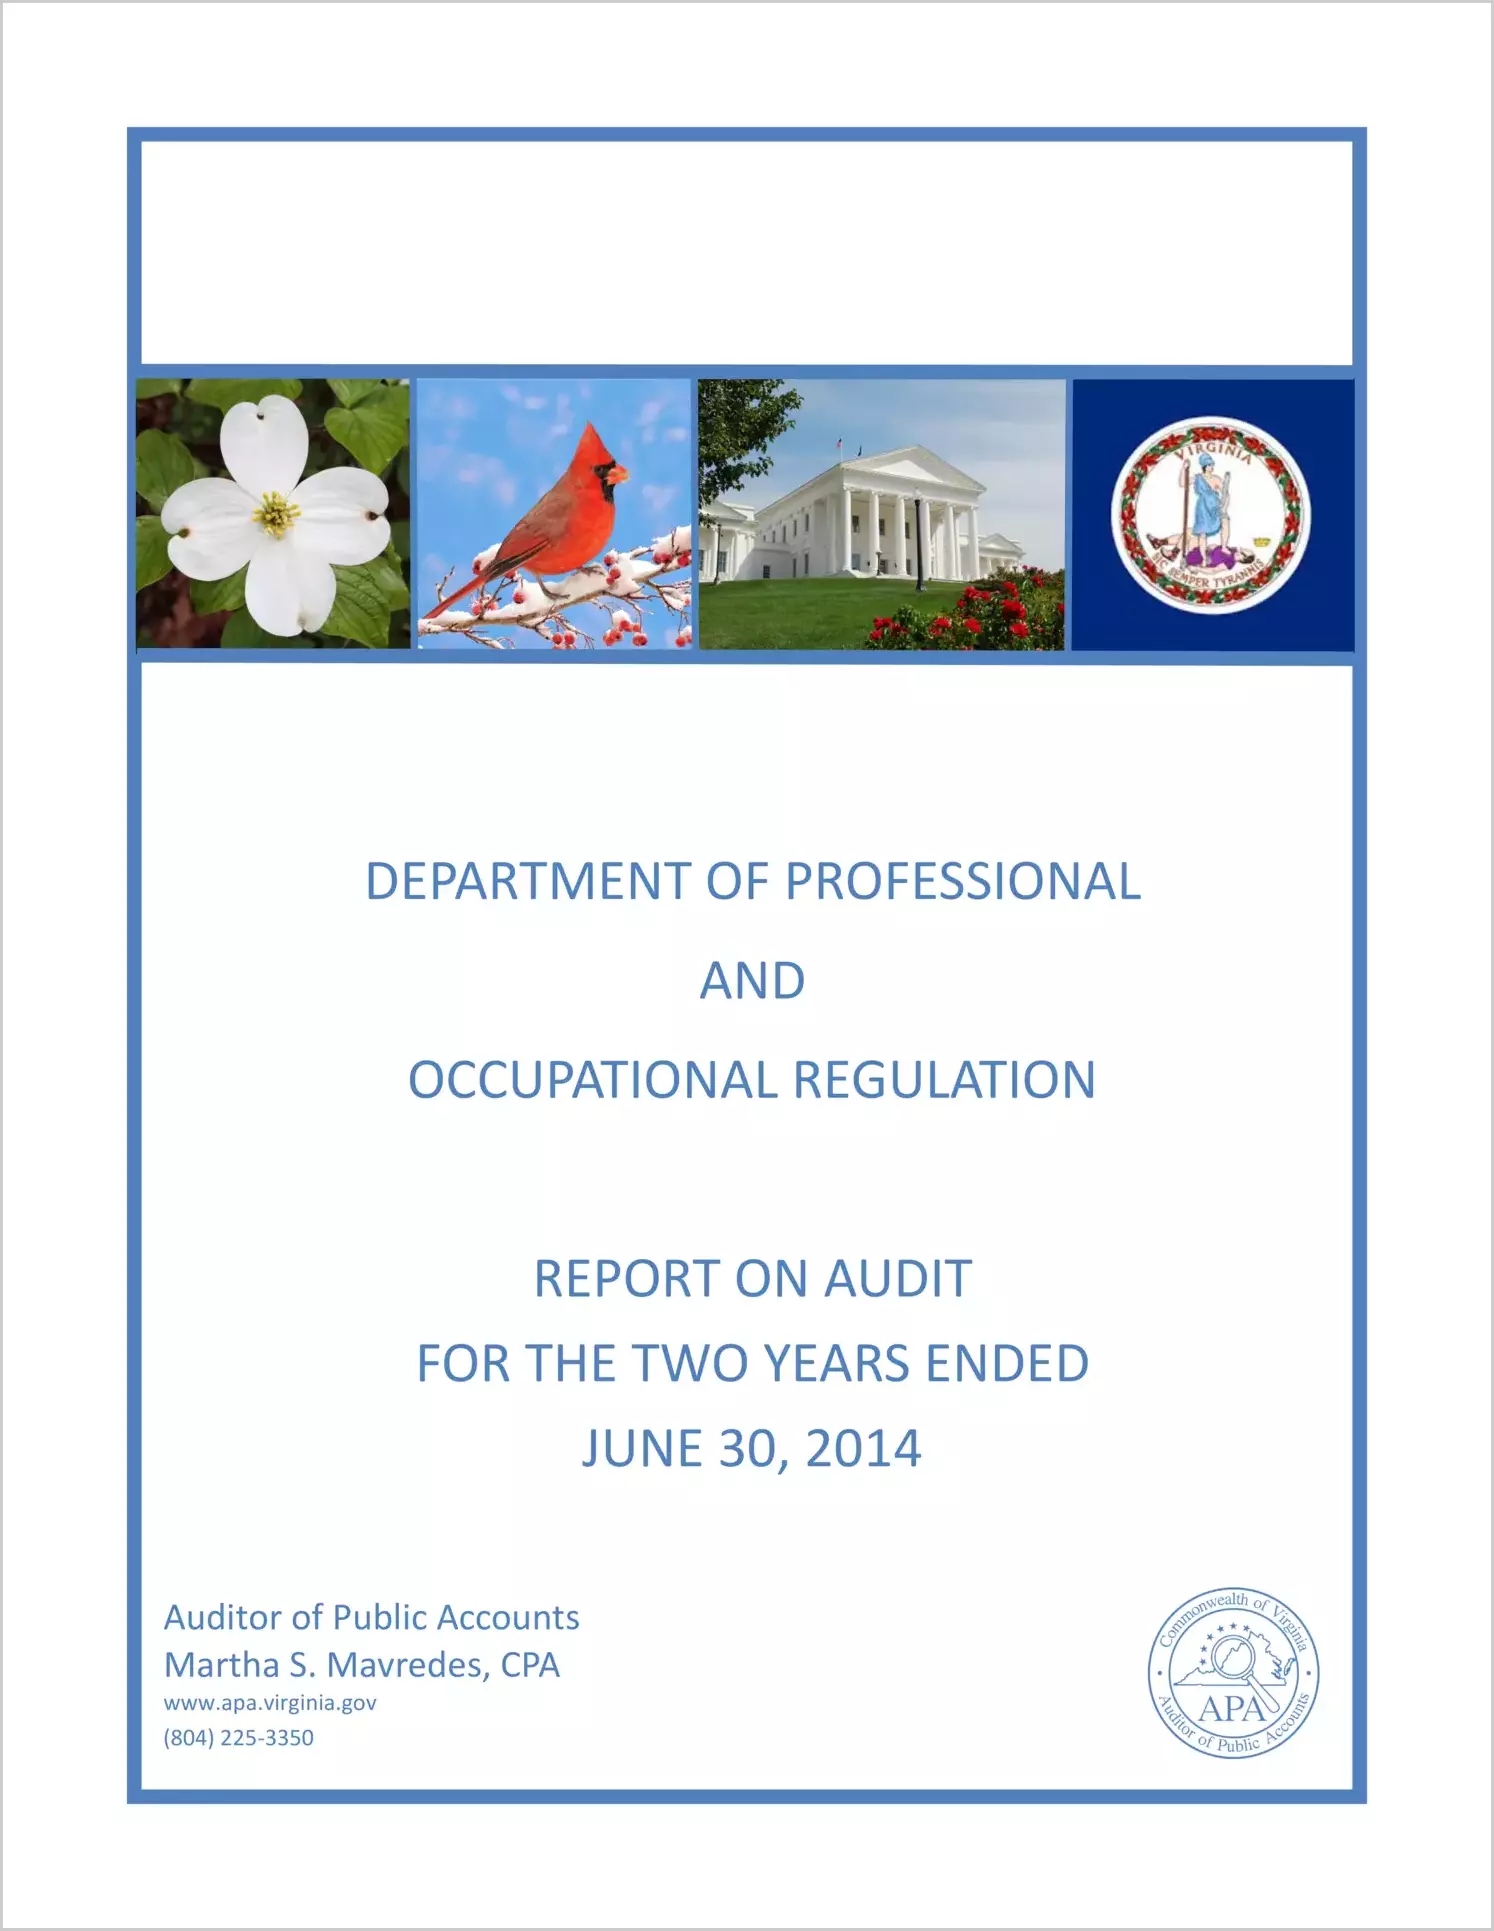 Department of Professional and Occupational Regulation report on audit for the two years ended June 30, 2014